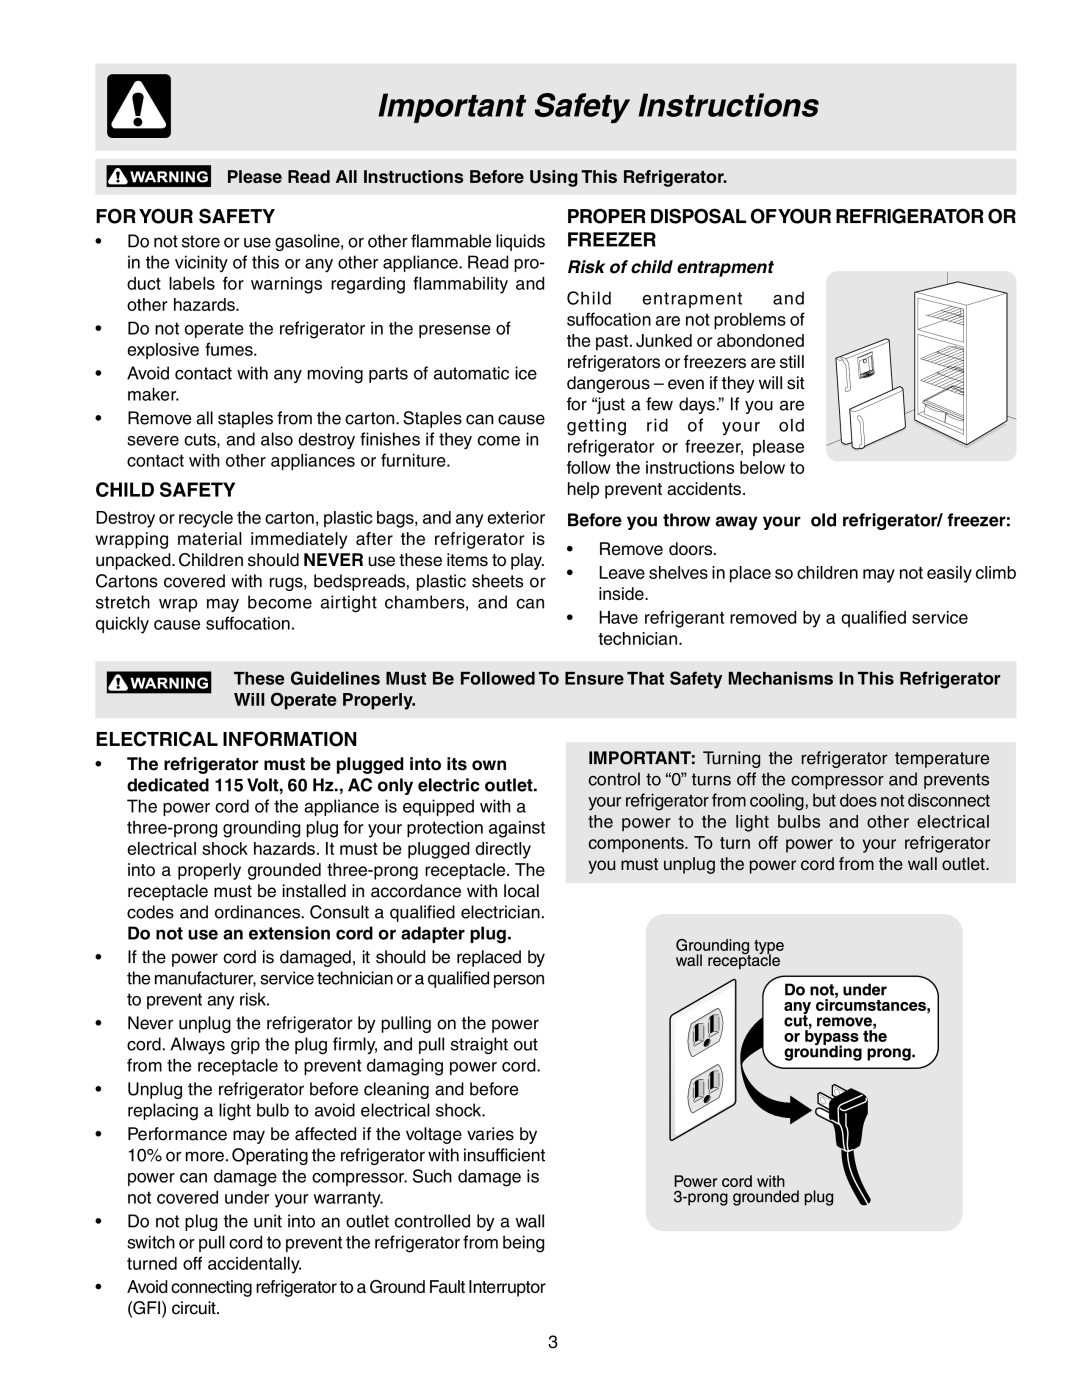 Frigidaire 241567601 manual Important Safety Instructions, For Your Safety, Child Safety, Electrical Information 